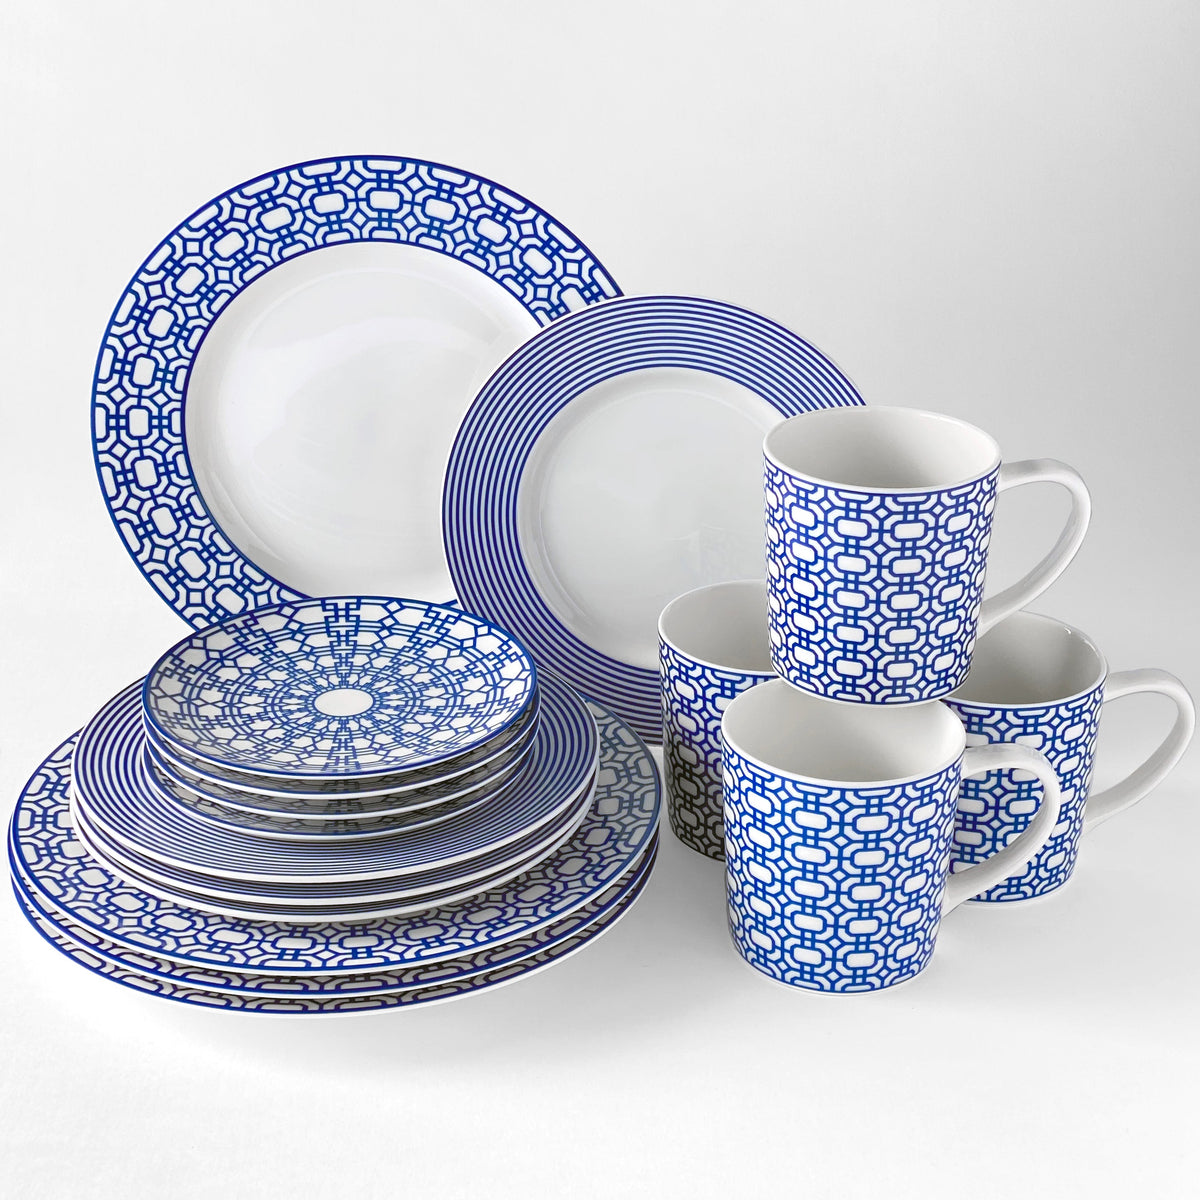 Set of blue and white ceramic dinnerware including Newport Small Plates by Caskata Artisanal Home and mugs, each featuring intricate geometric patterns reminiscent of a Newport Garden Gate. Crafted from premium porcelain, this set seamlessly blends style and durability.